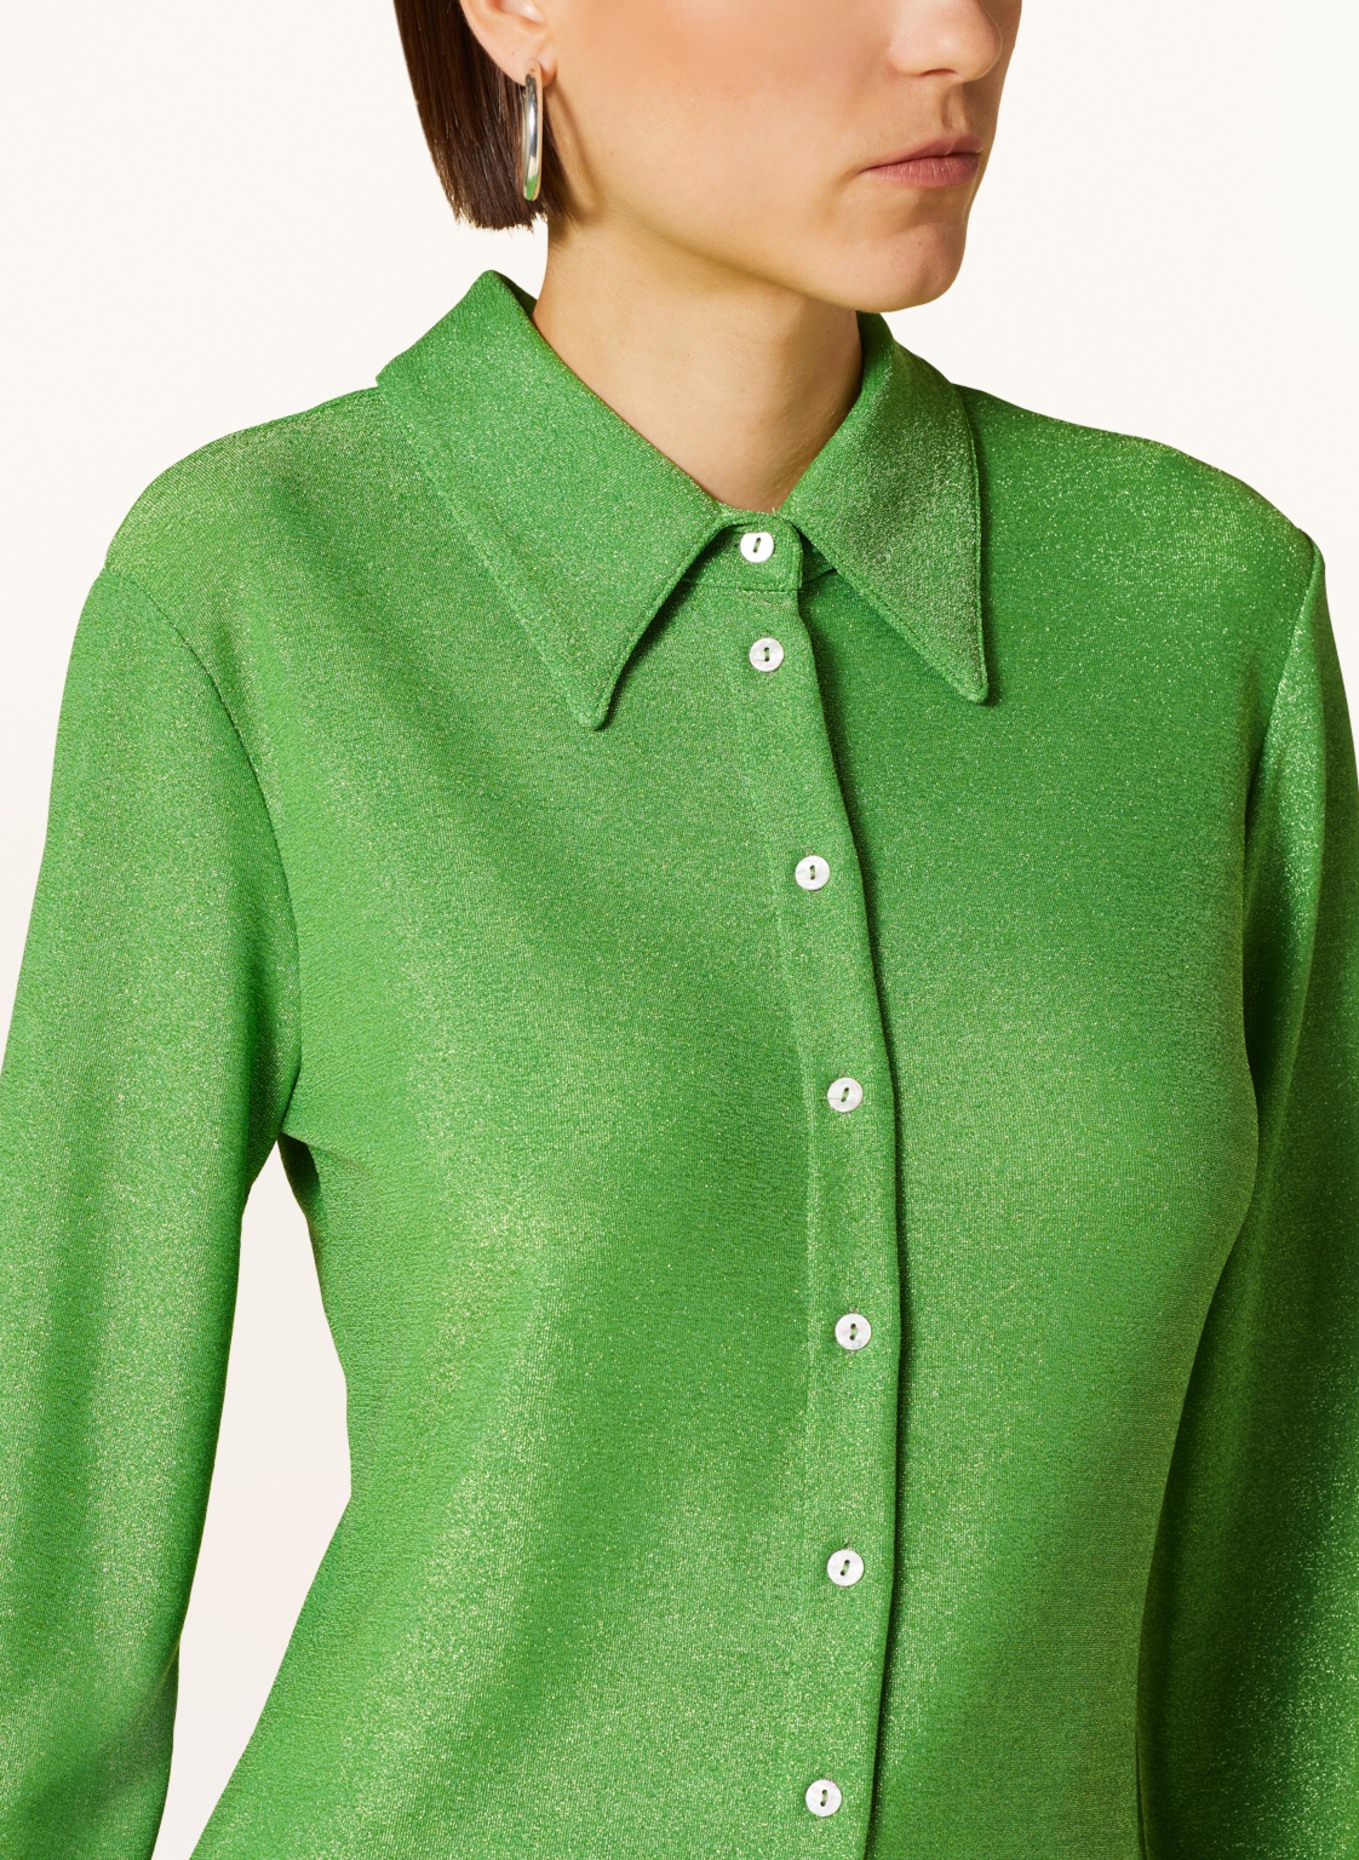 SEM PER LEI Shirt blouse with glitter thread, Color: LIGHT GREEN (Image 4)